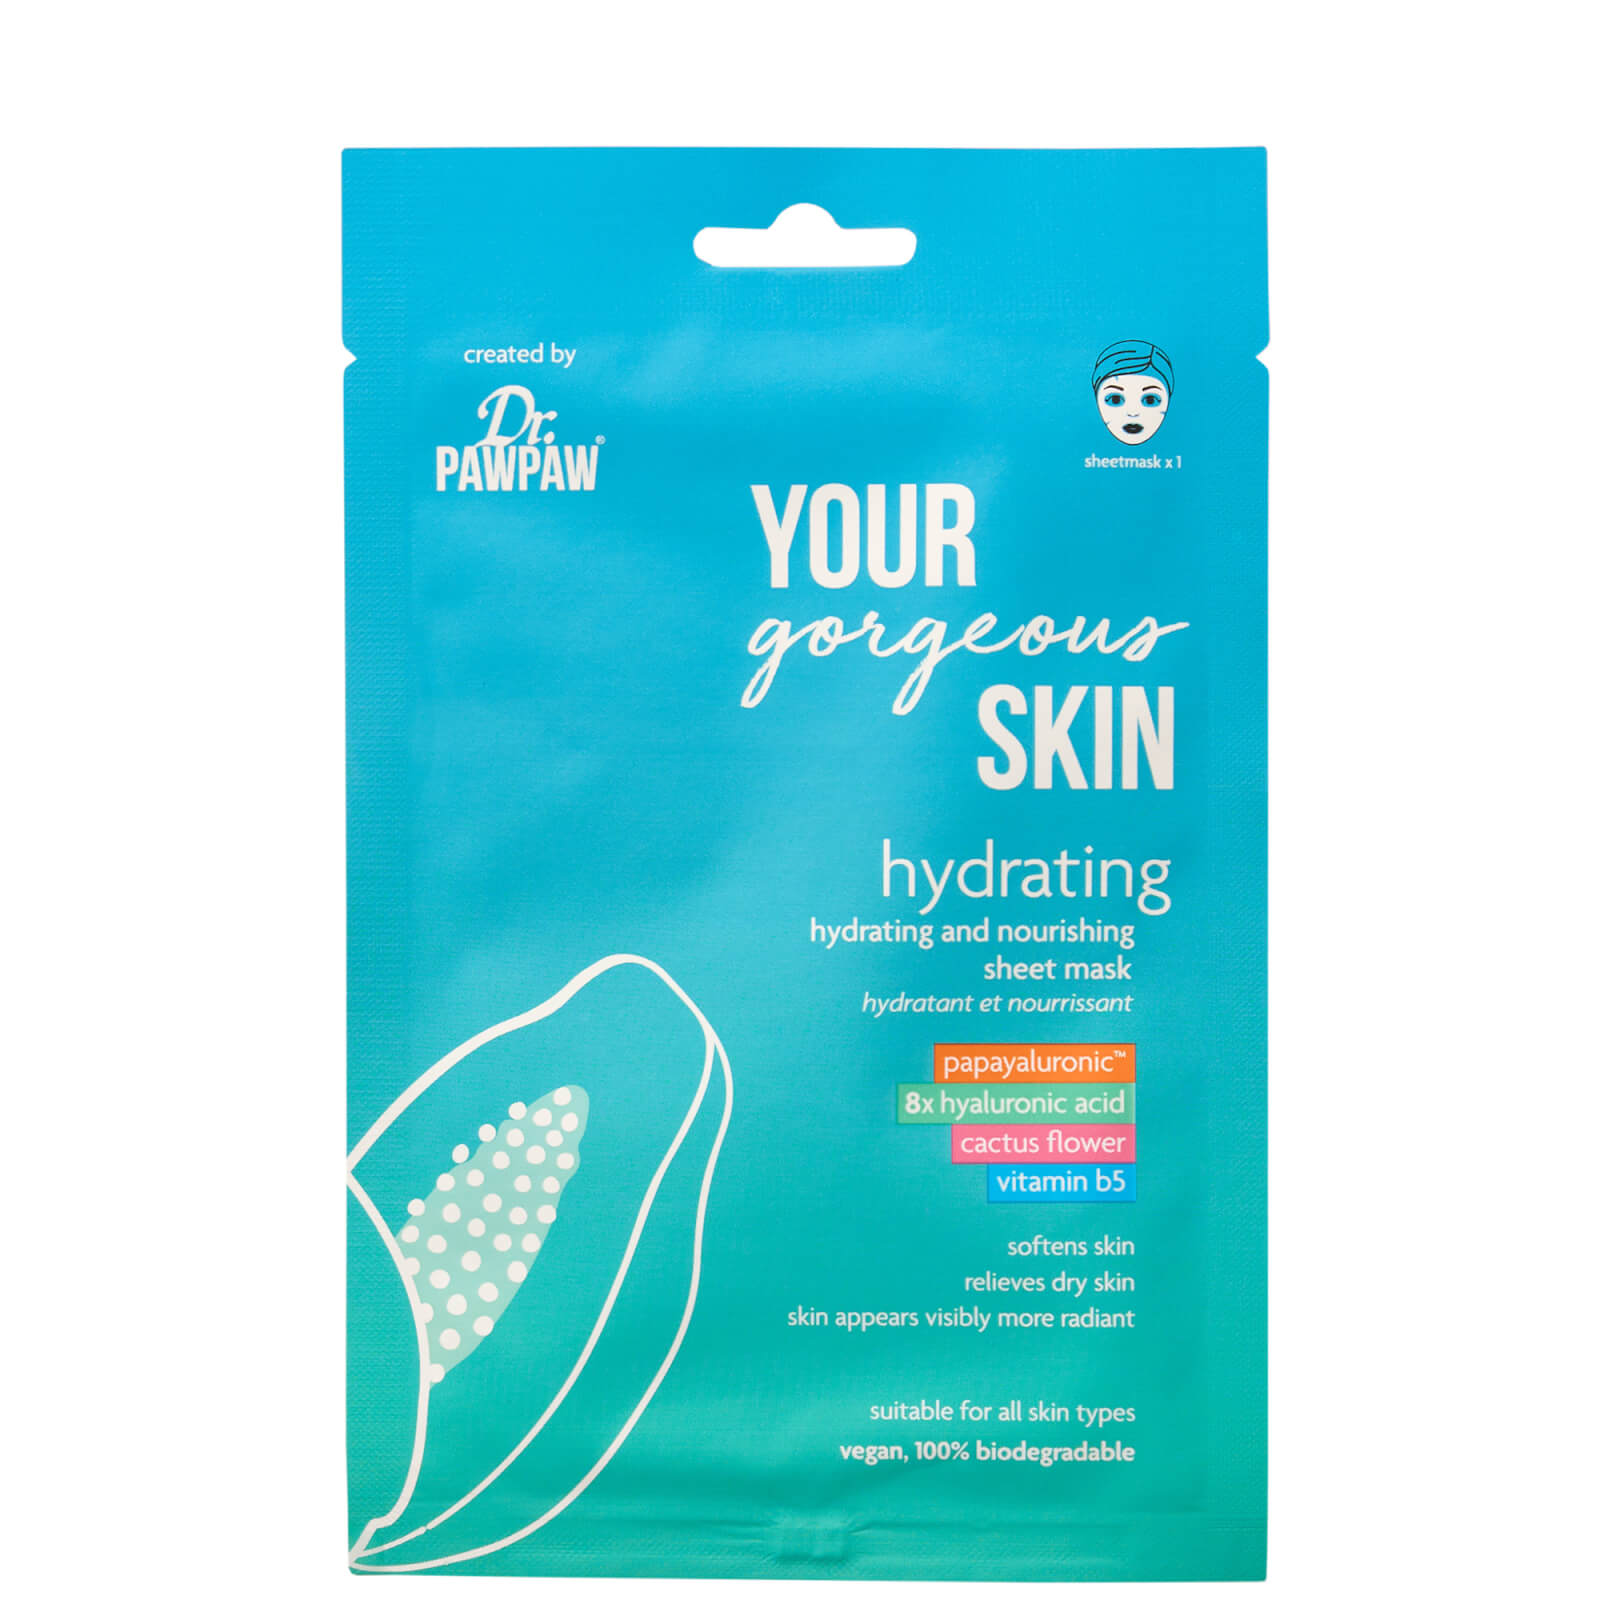 Dr. PAWPAW Your Gorgeous Skin Hydrating and Nourishing Sheet Mask von Dr. PAWPAW